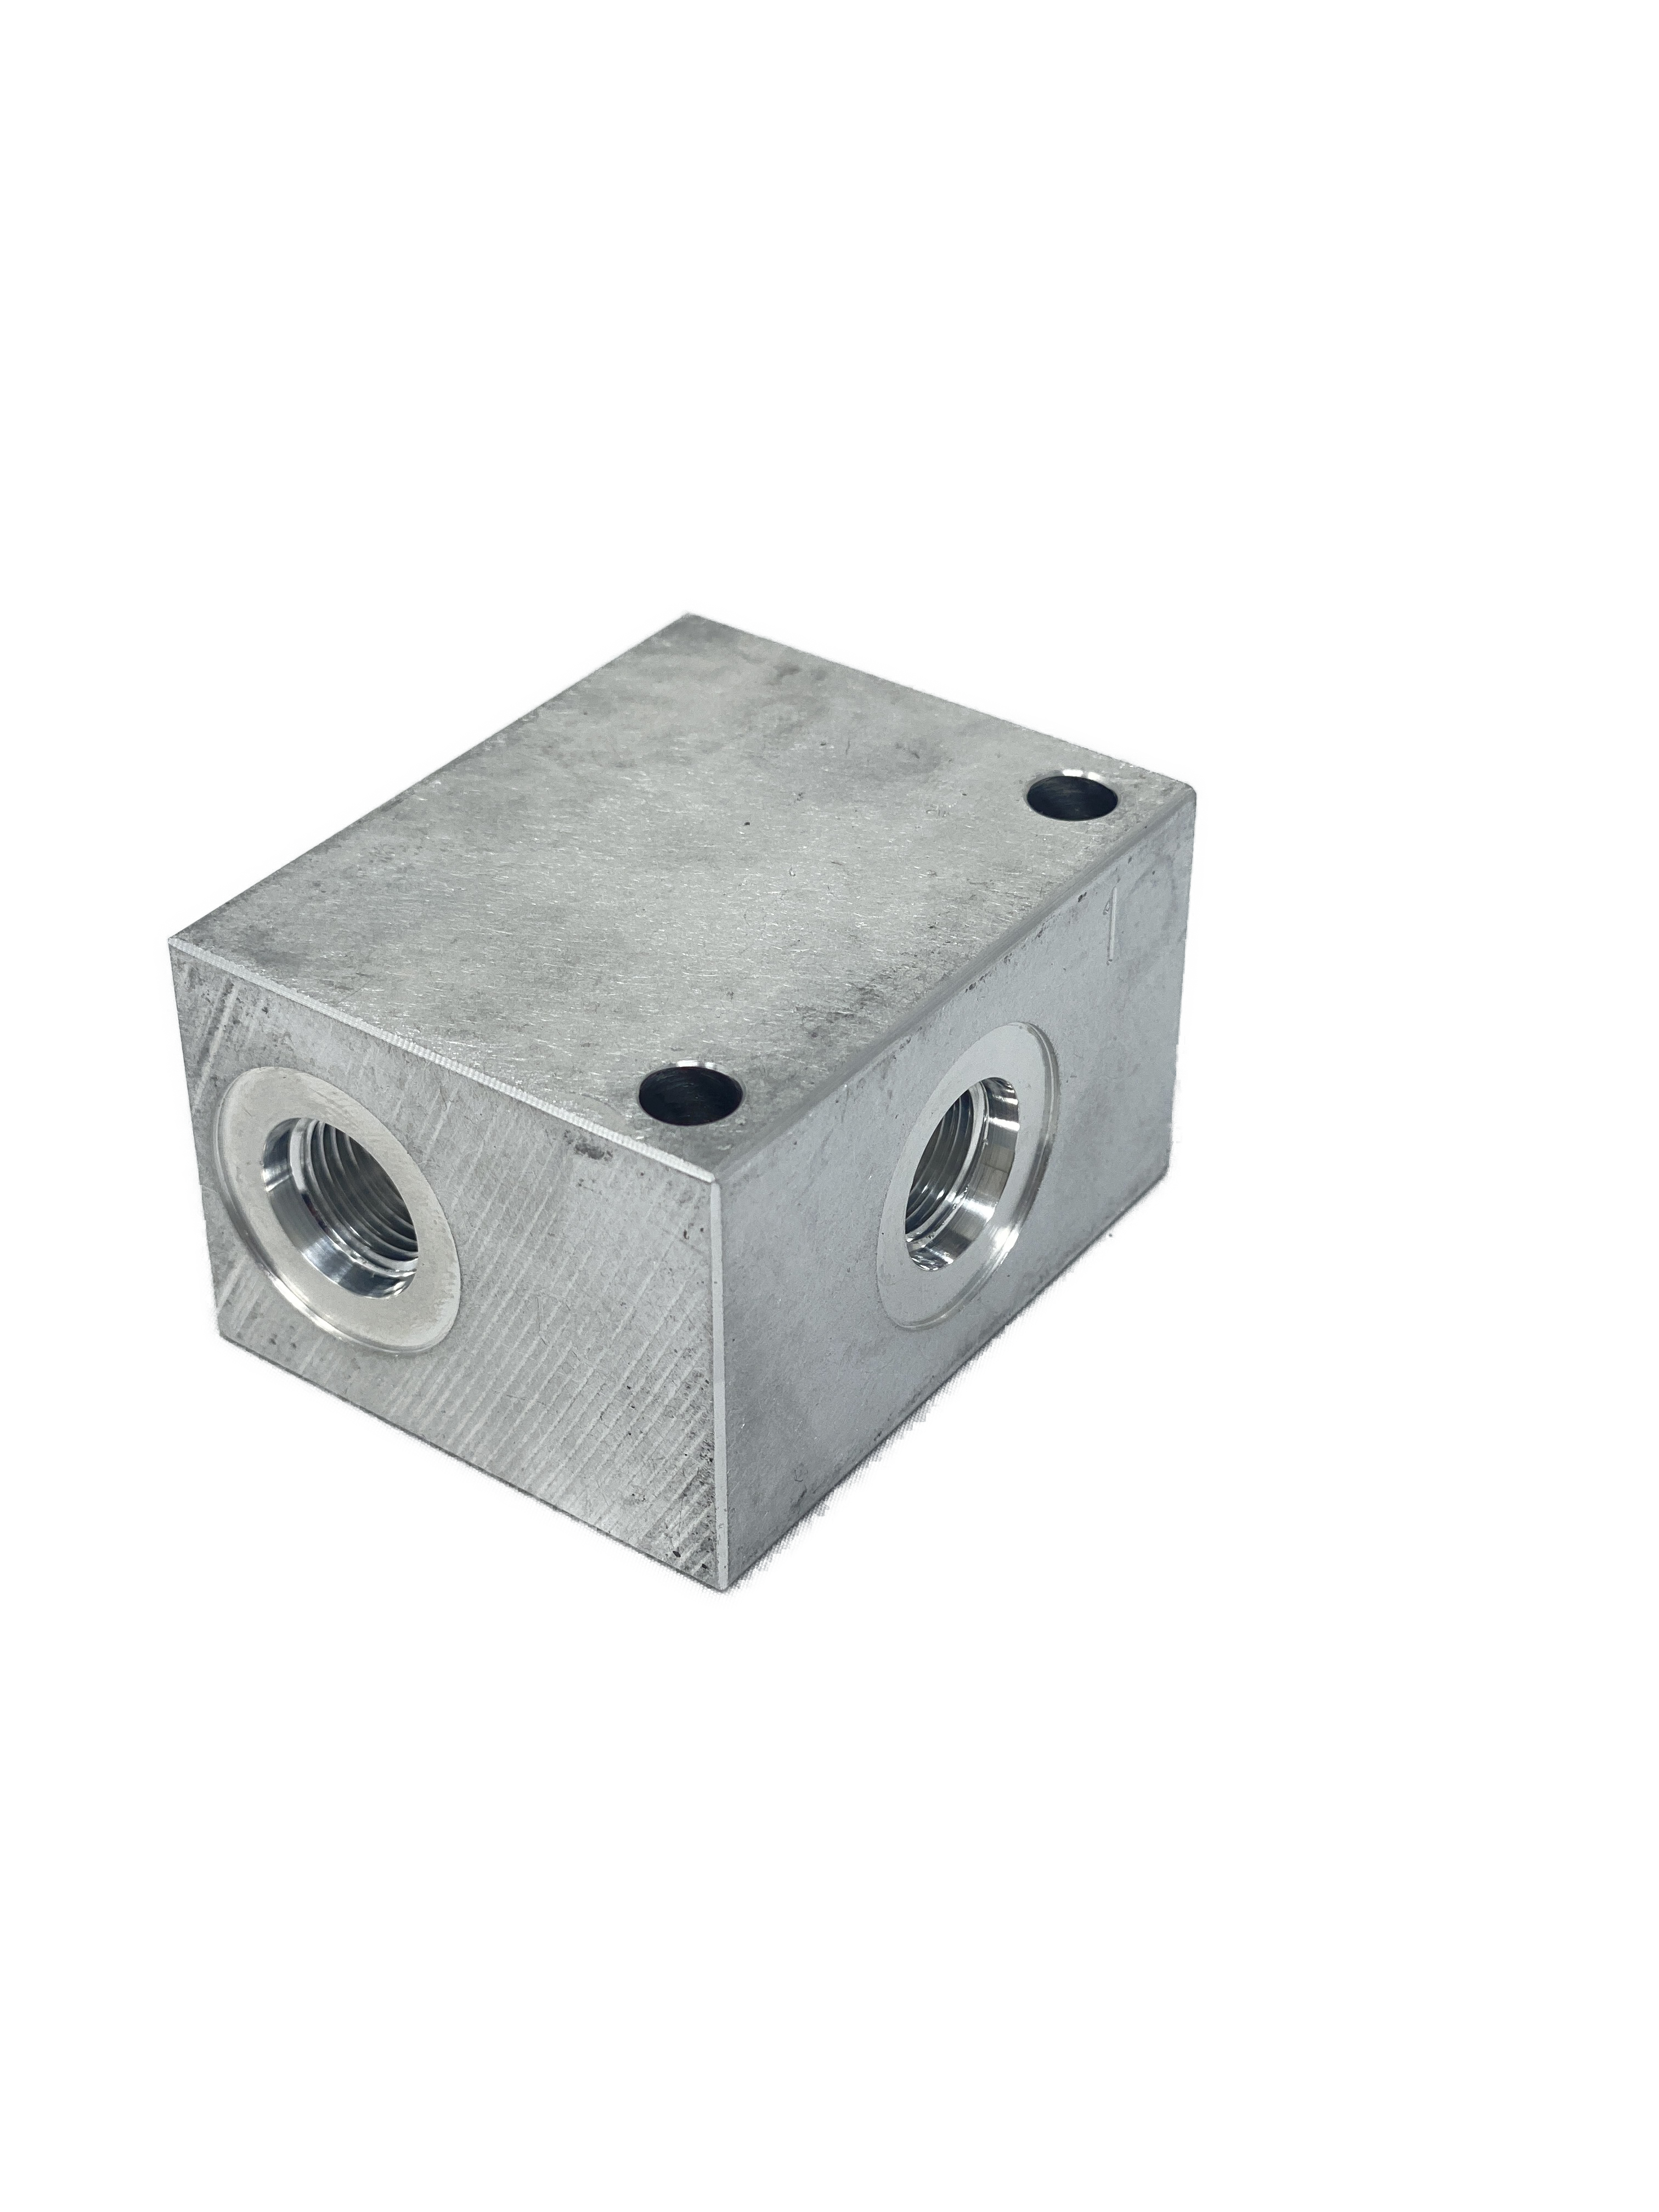 AC162CB12S : Daman Common Cavity Body, C-16-2 Cartridge Cavity, #12 SAE (3/4") Port Connections, 3000psi Rated, Aluminum, Without Gauge Port